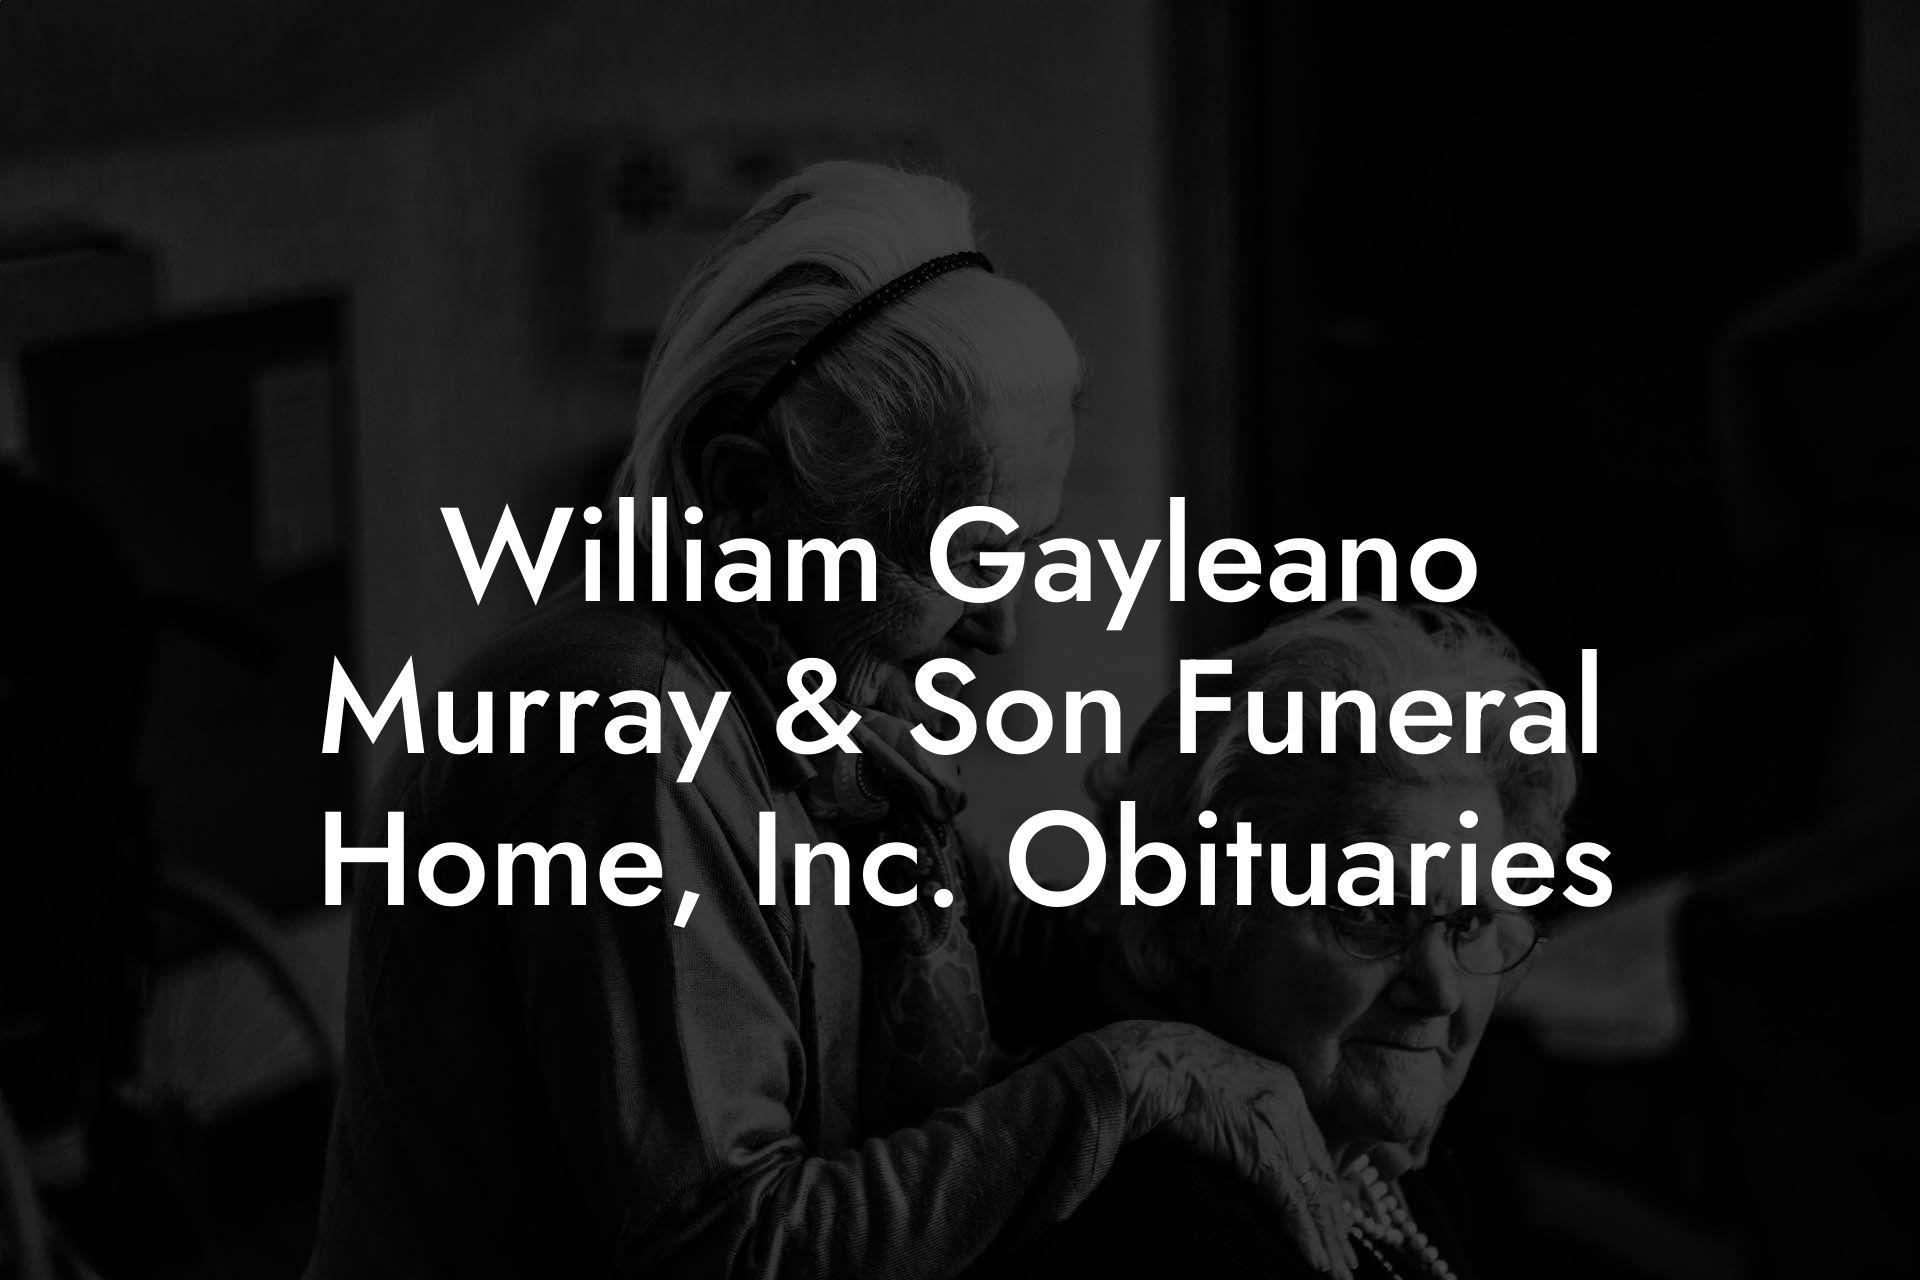 William Gayleano Murray & Son Funeral Home, Inc. Obituaries